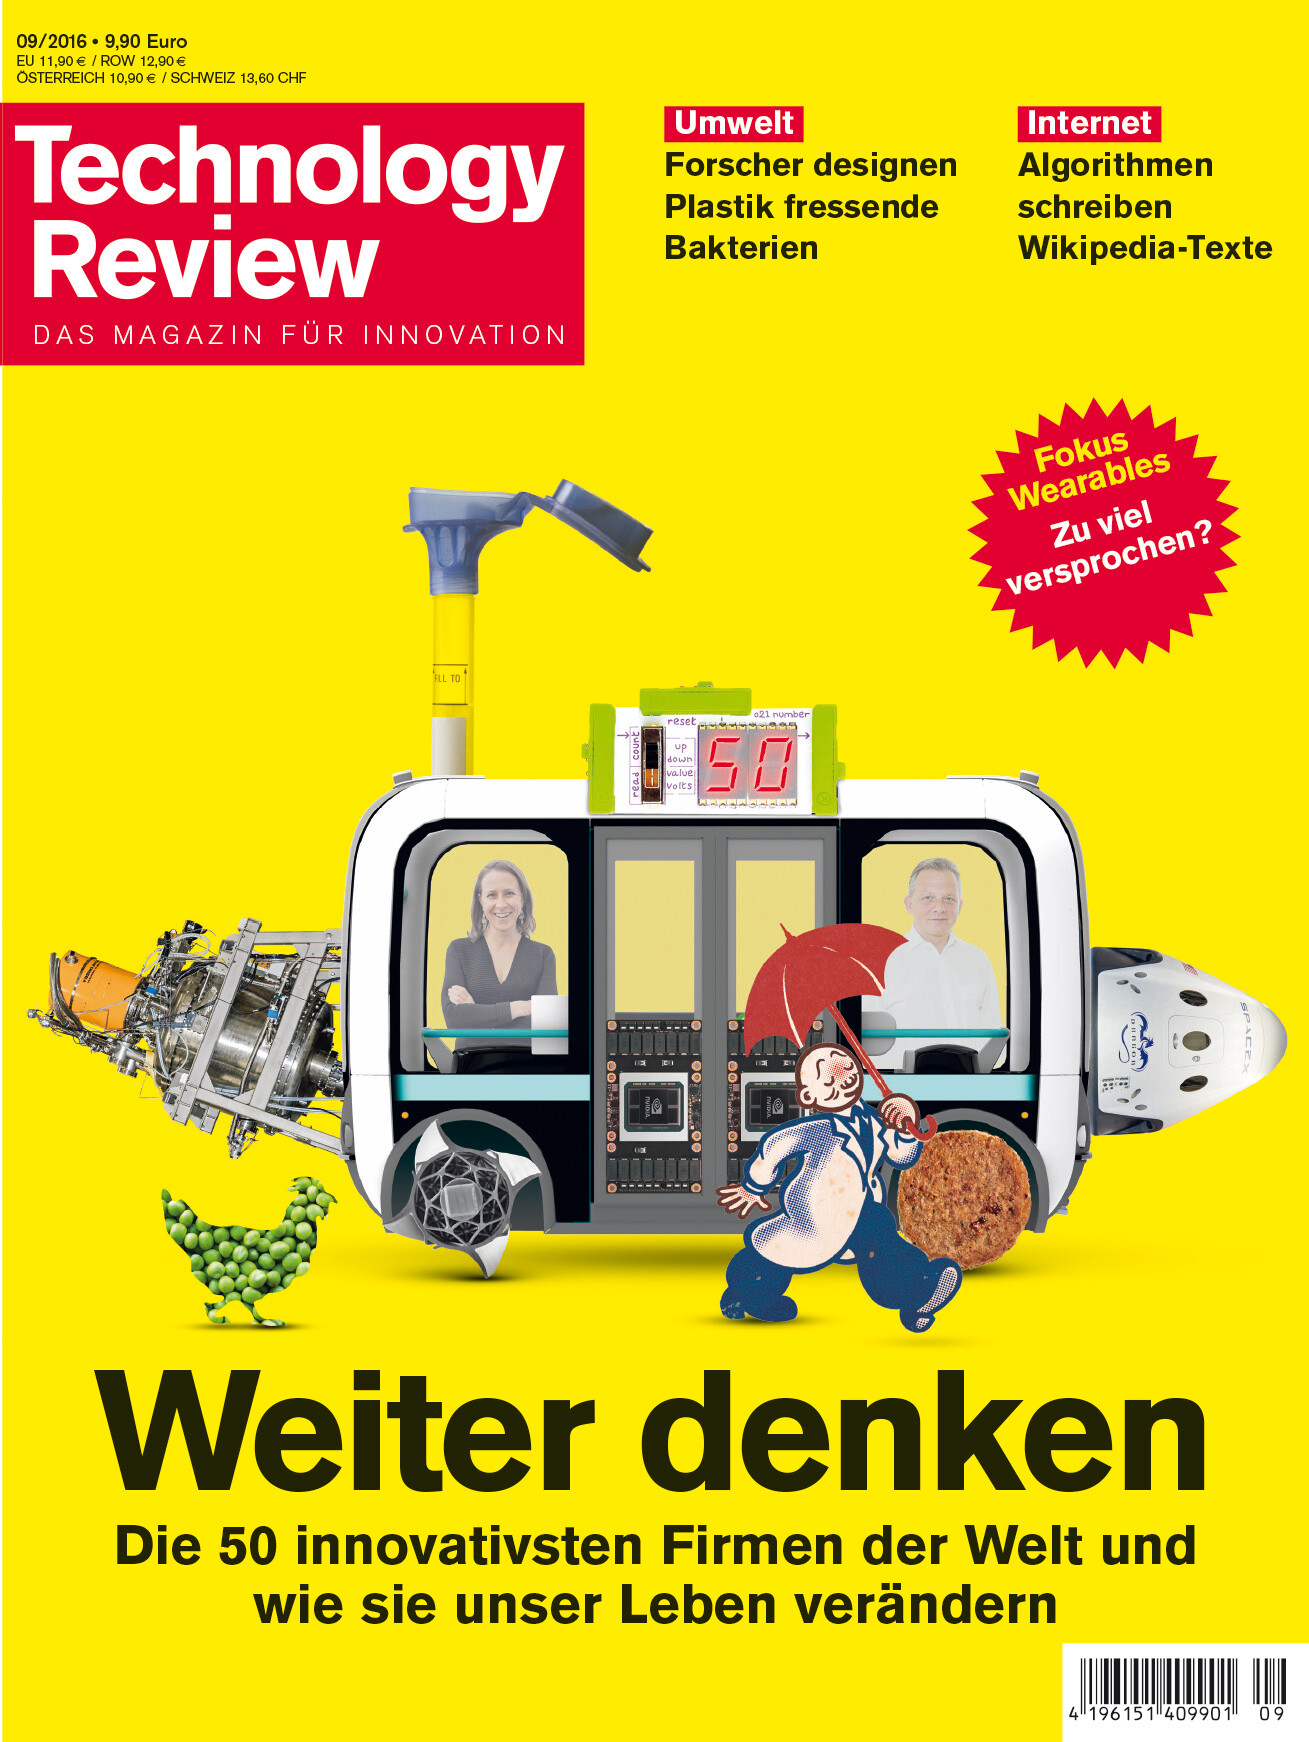 Technology Review 09/2016